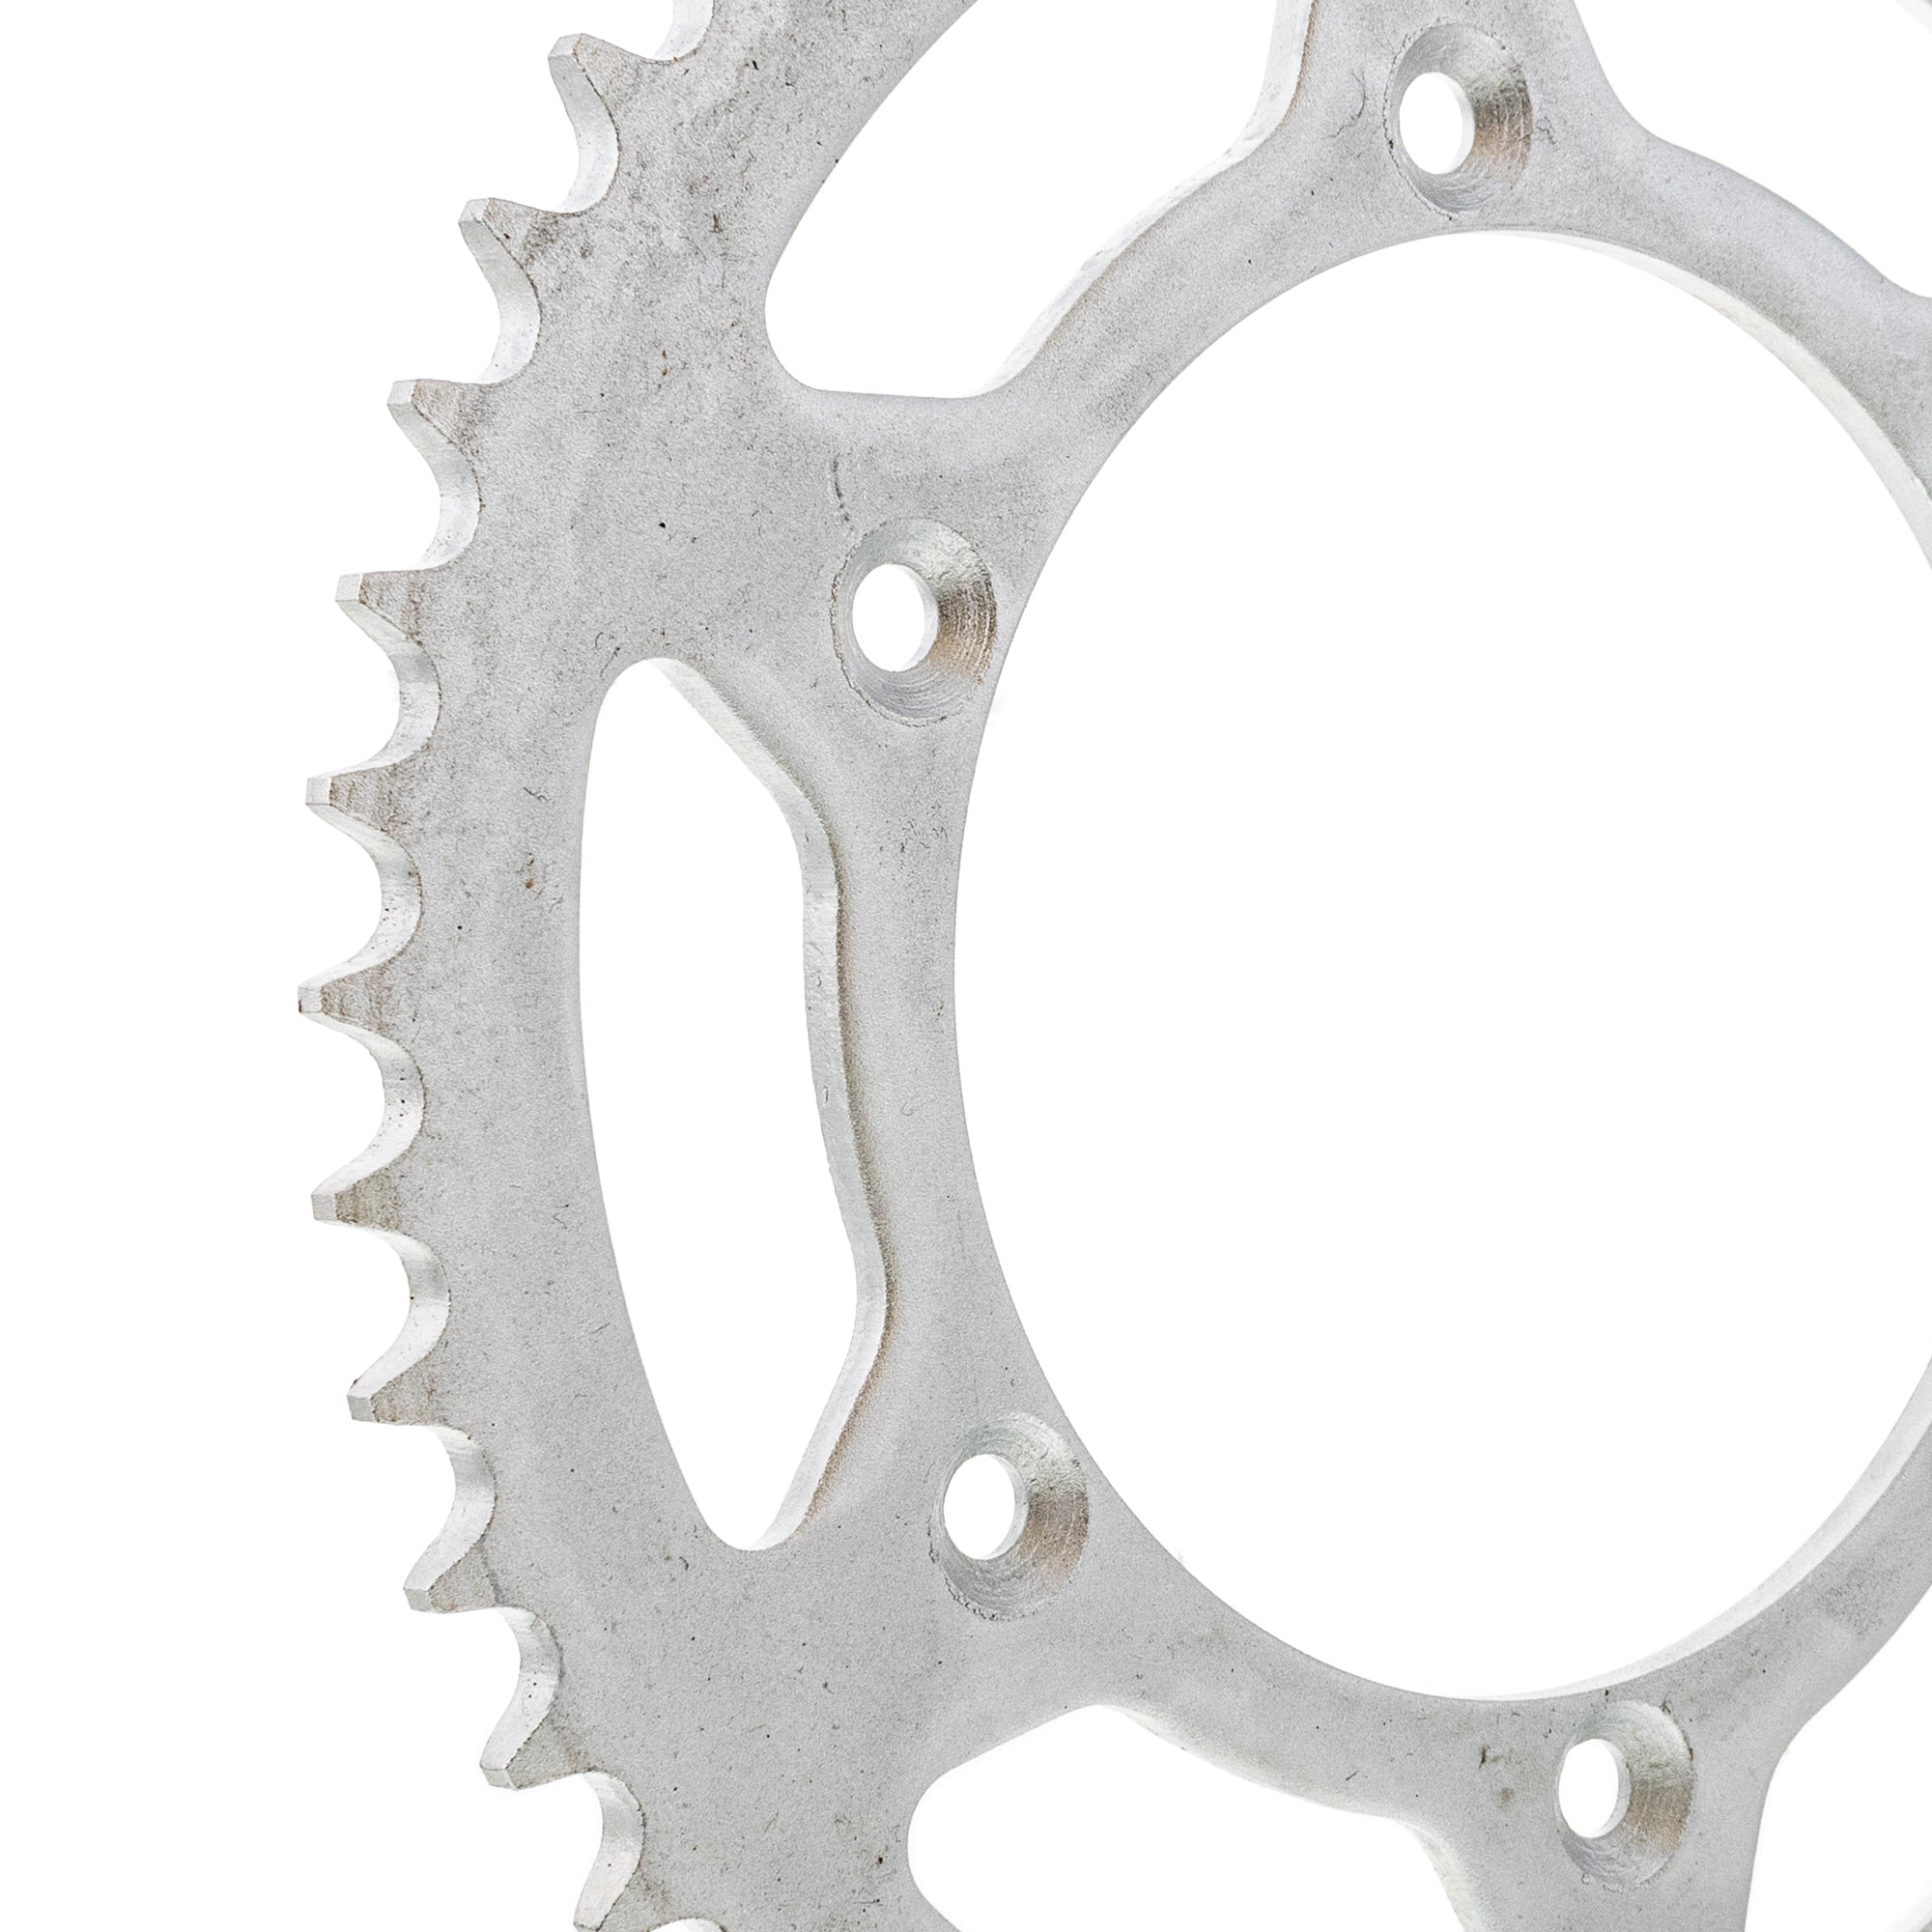 520 Front 13T Rear 49T Drive Sprocket Kit for Yamaha YZ450F